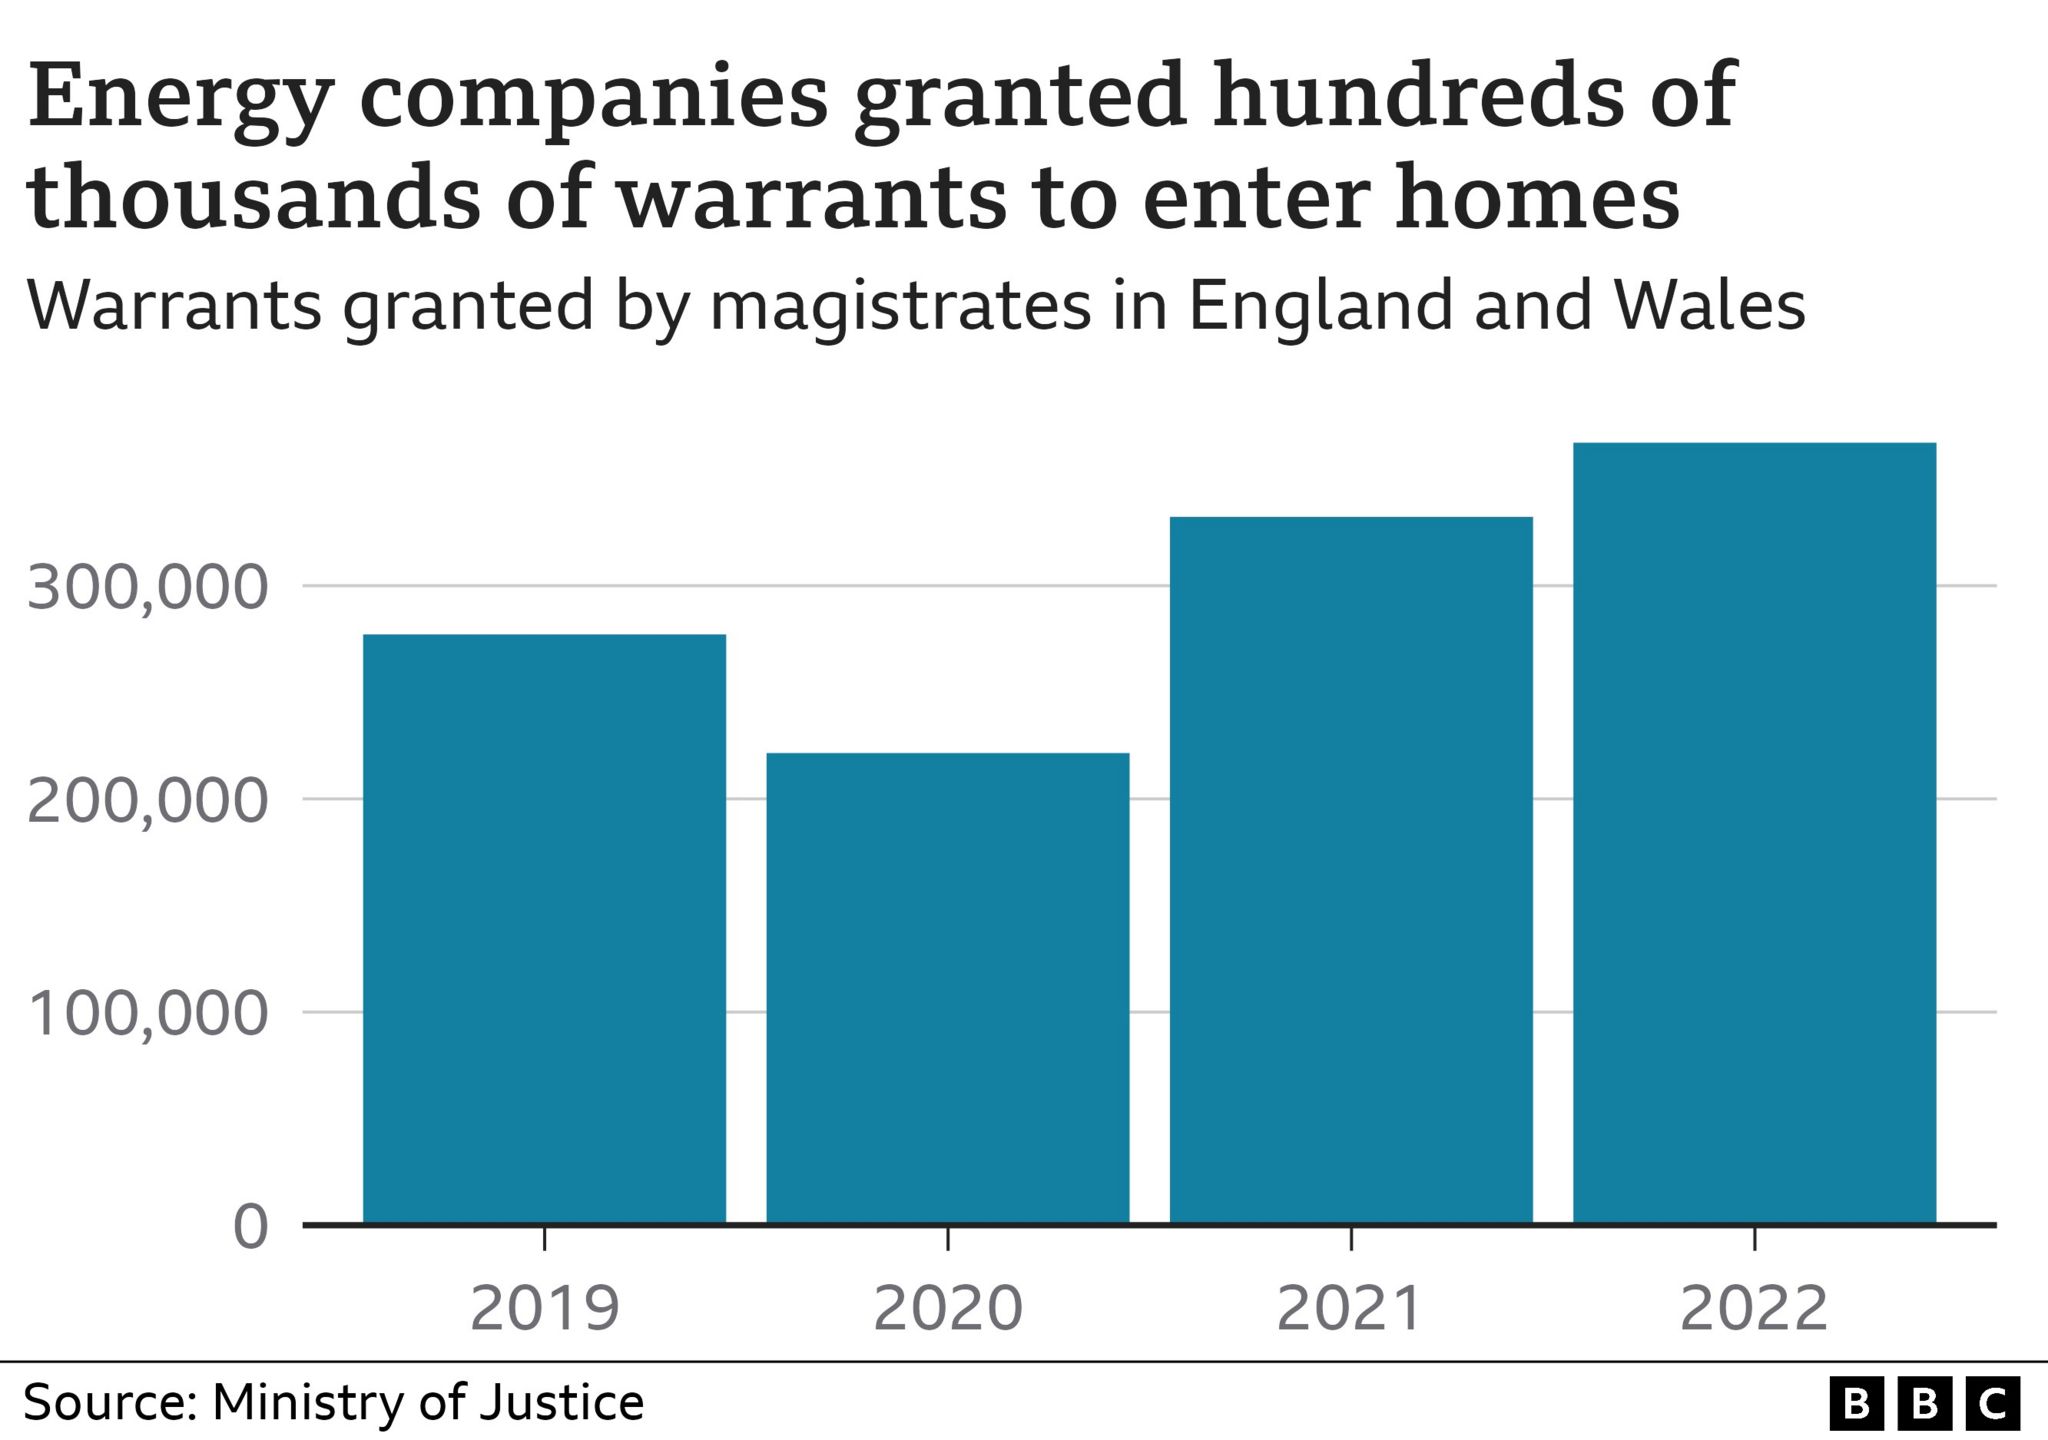 A bar chart showing the number of warrants granted to energy companies to enter homes in England and Wales, rising from just over 277000 in 2019 to just over 367000 in 2022 with a slight dip in 2020.